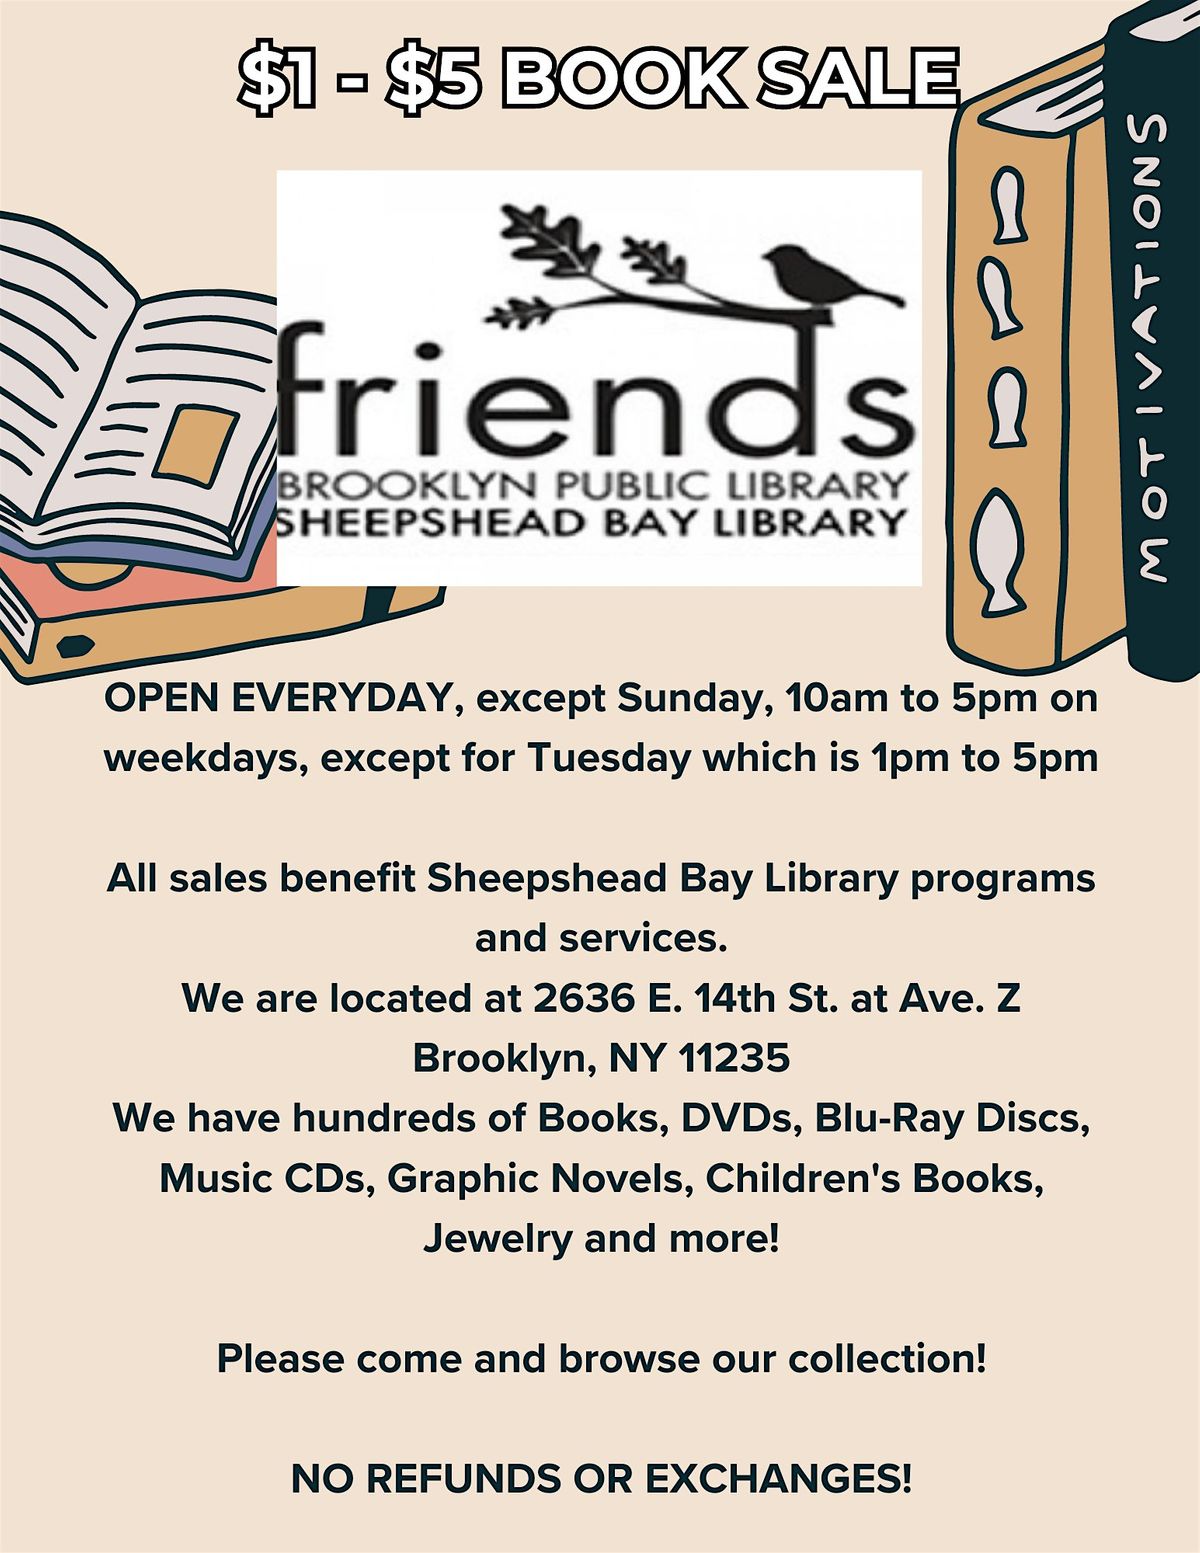 $1 Book Sale and Gift Shop @ Sheepshead Bay Library